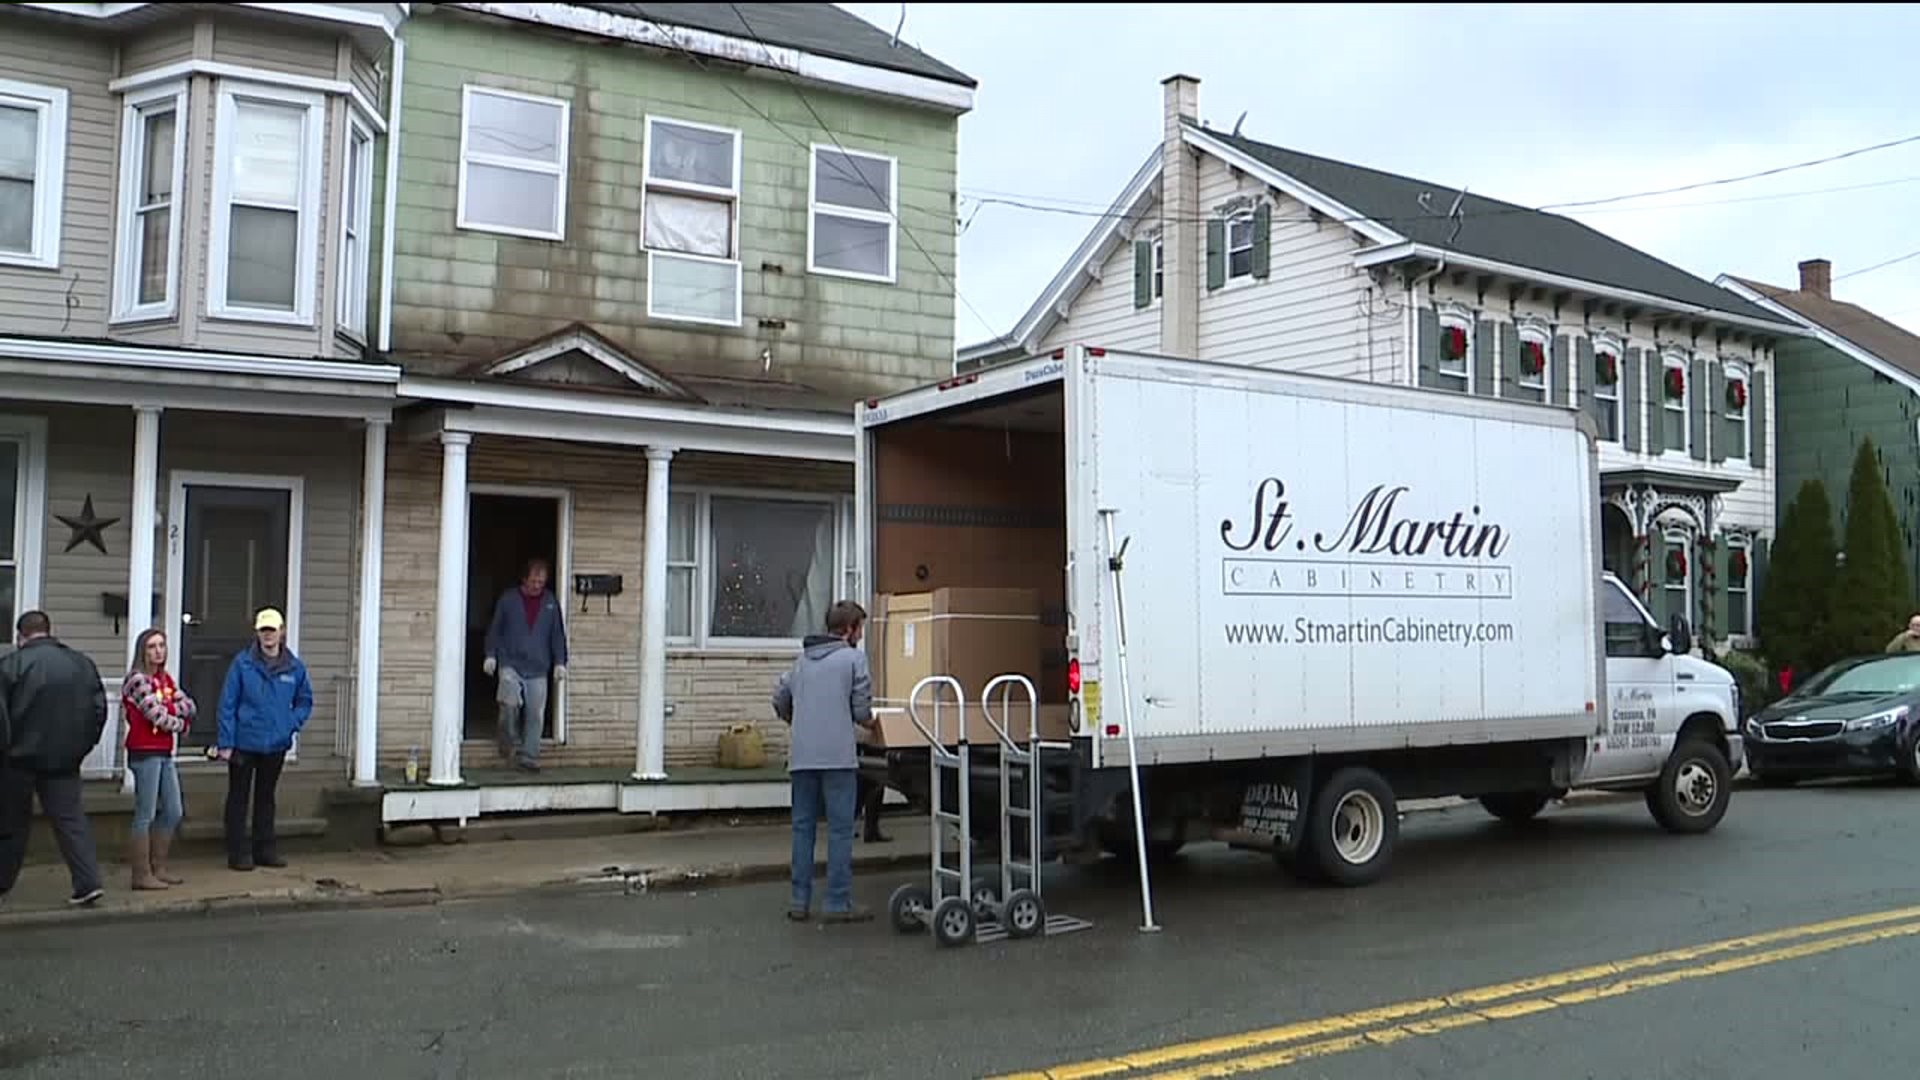 Flood Victims in Schuylkill County Get a Christmas Surprise